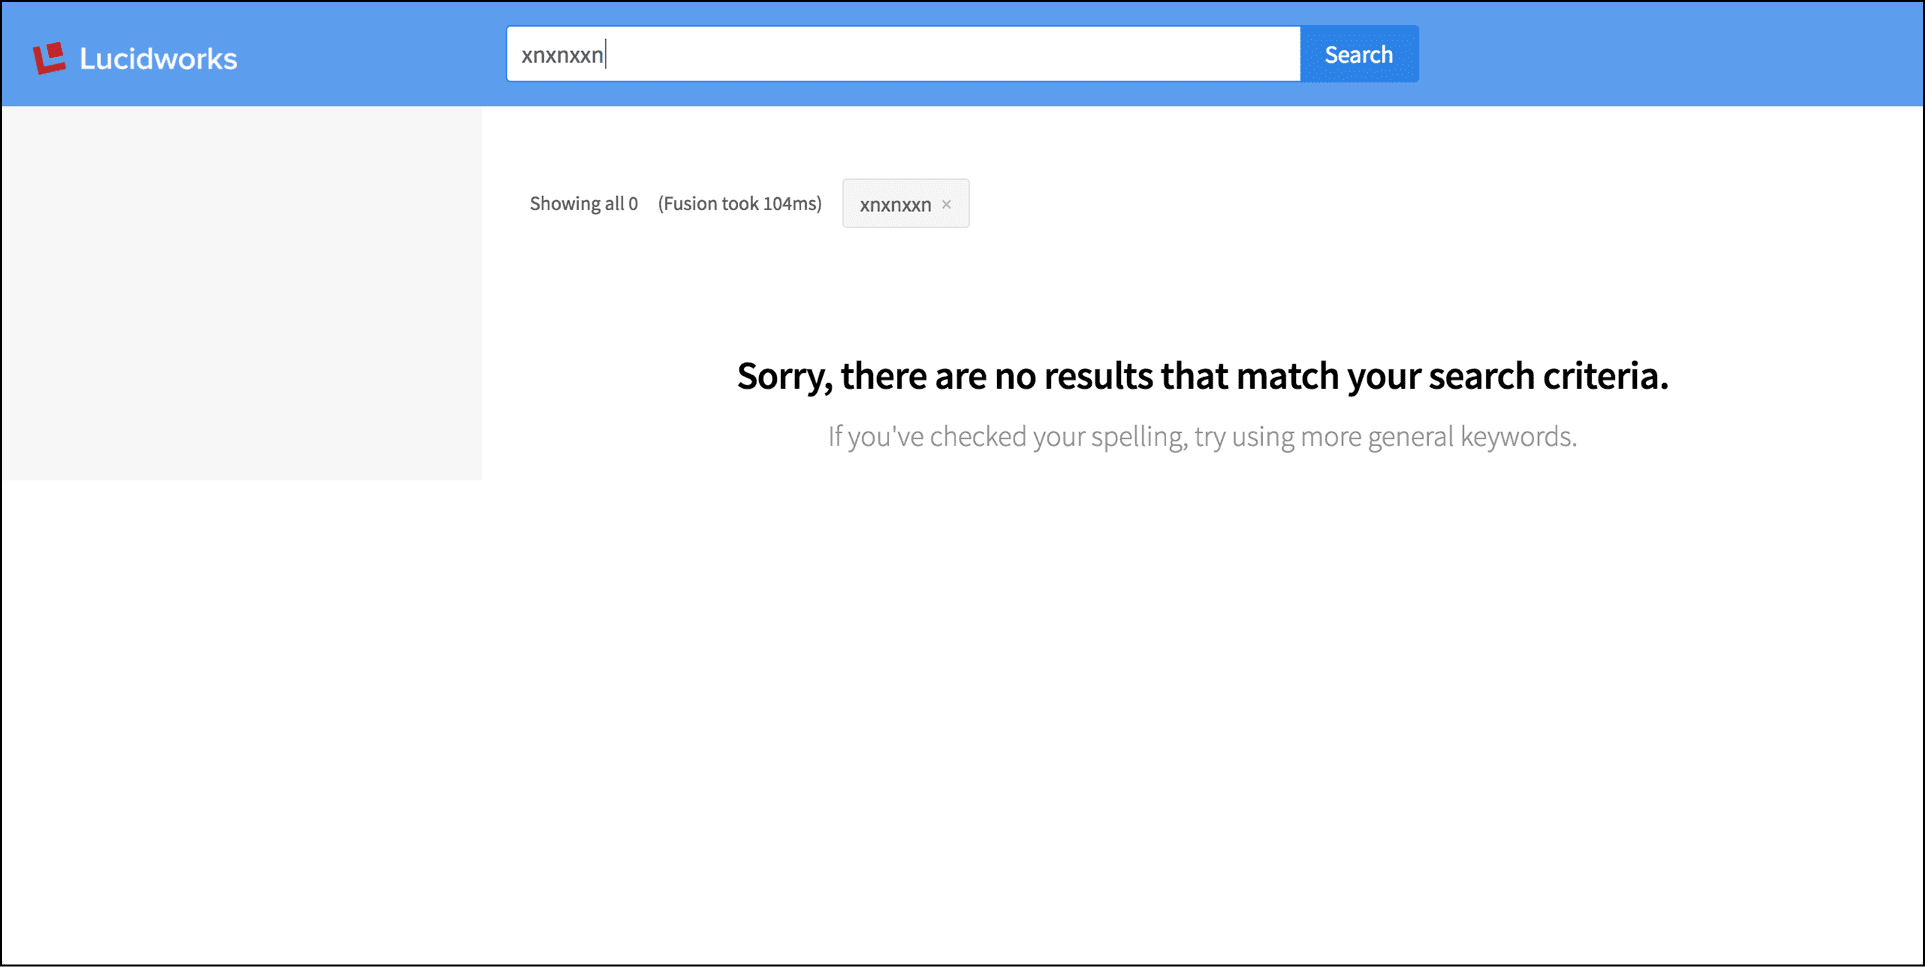 No results